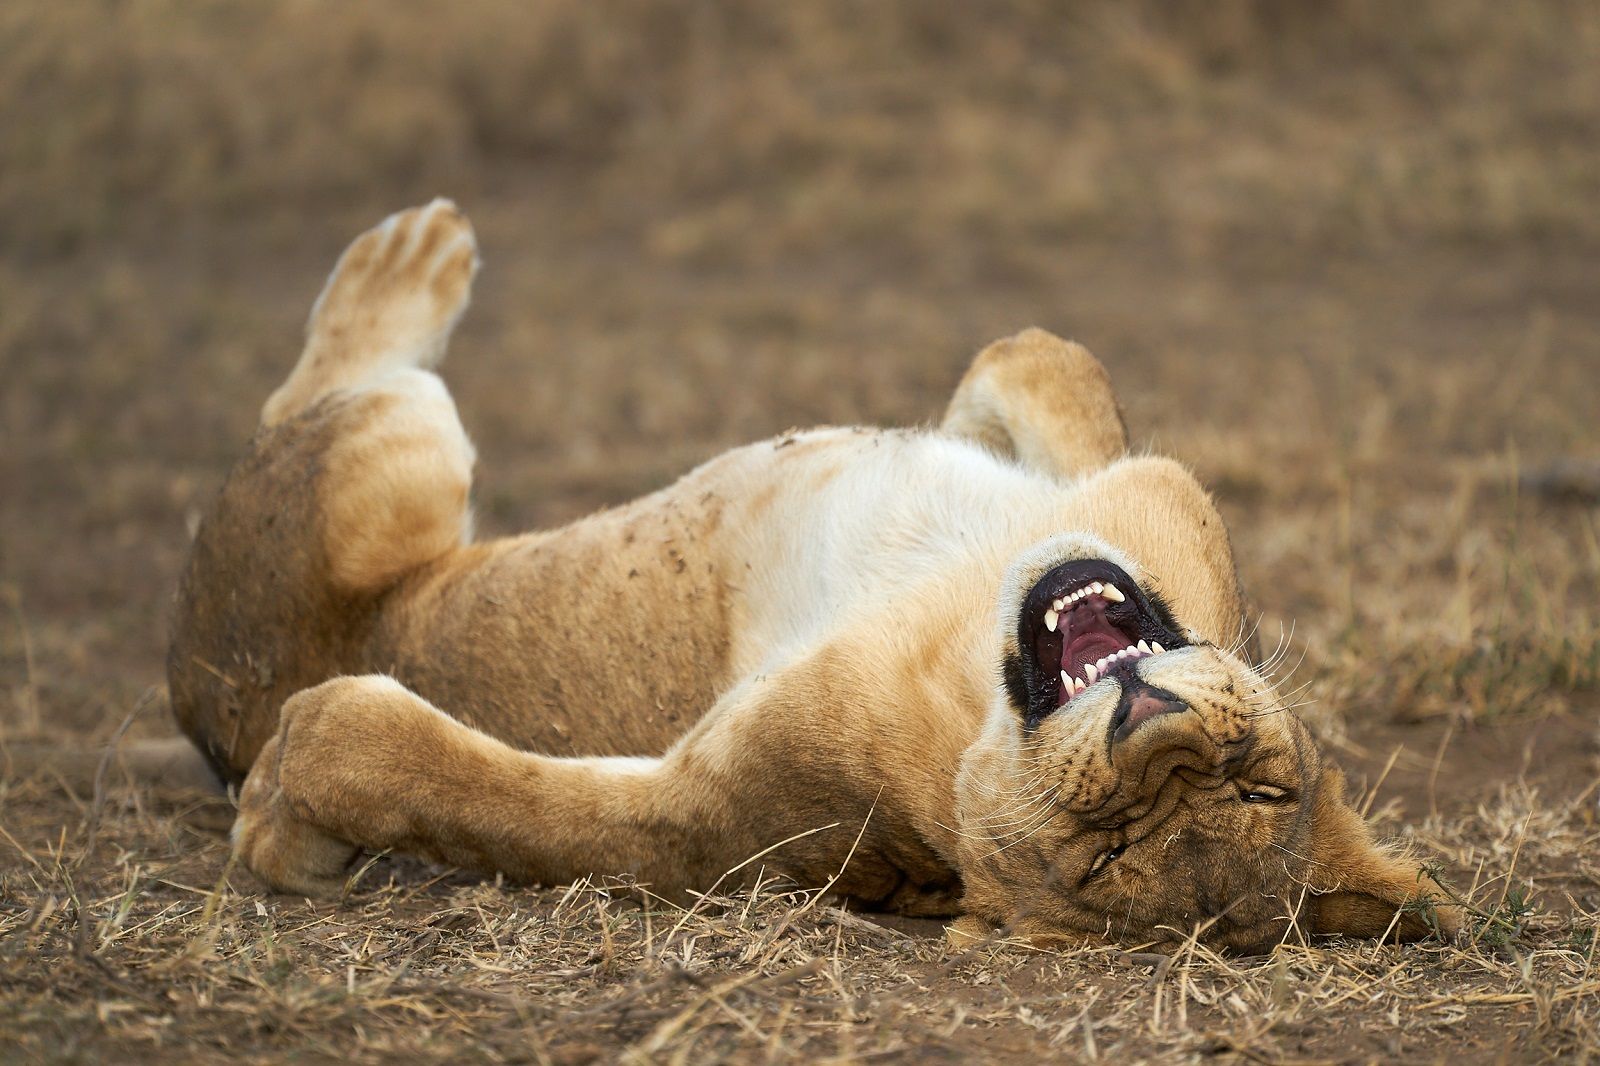 Enjoy a good giggle with the Comedy Wildlife Photography awards photo 45